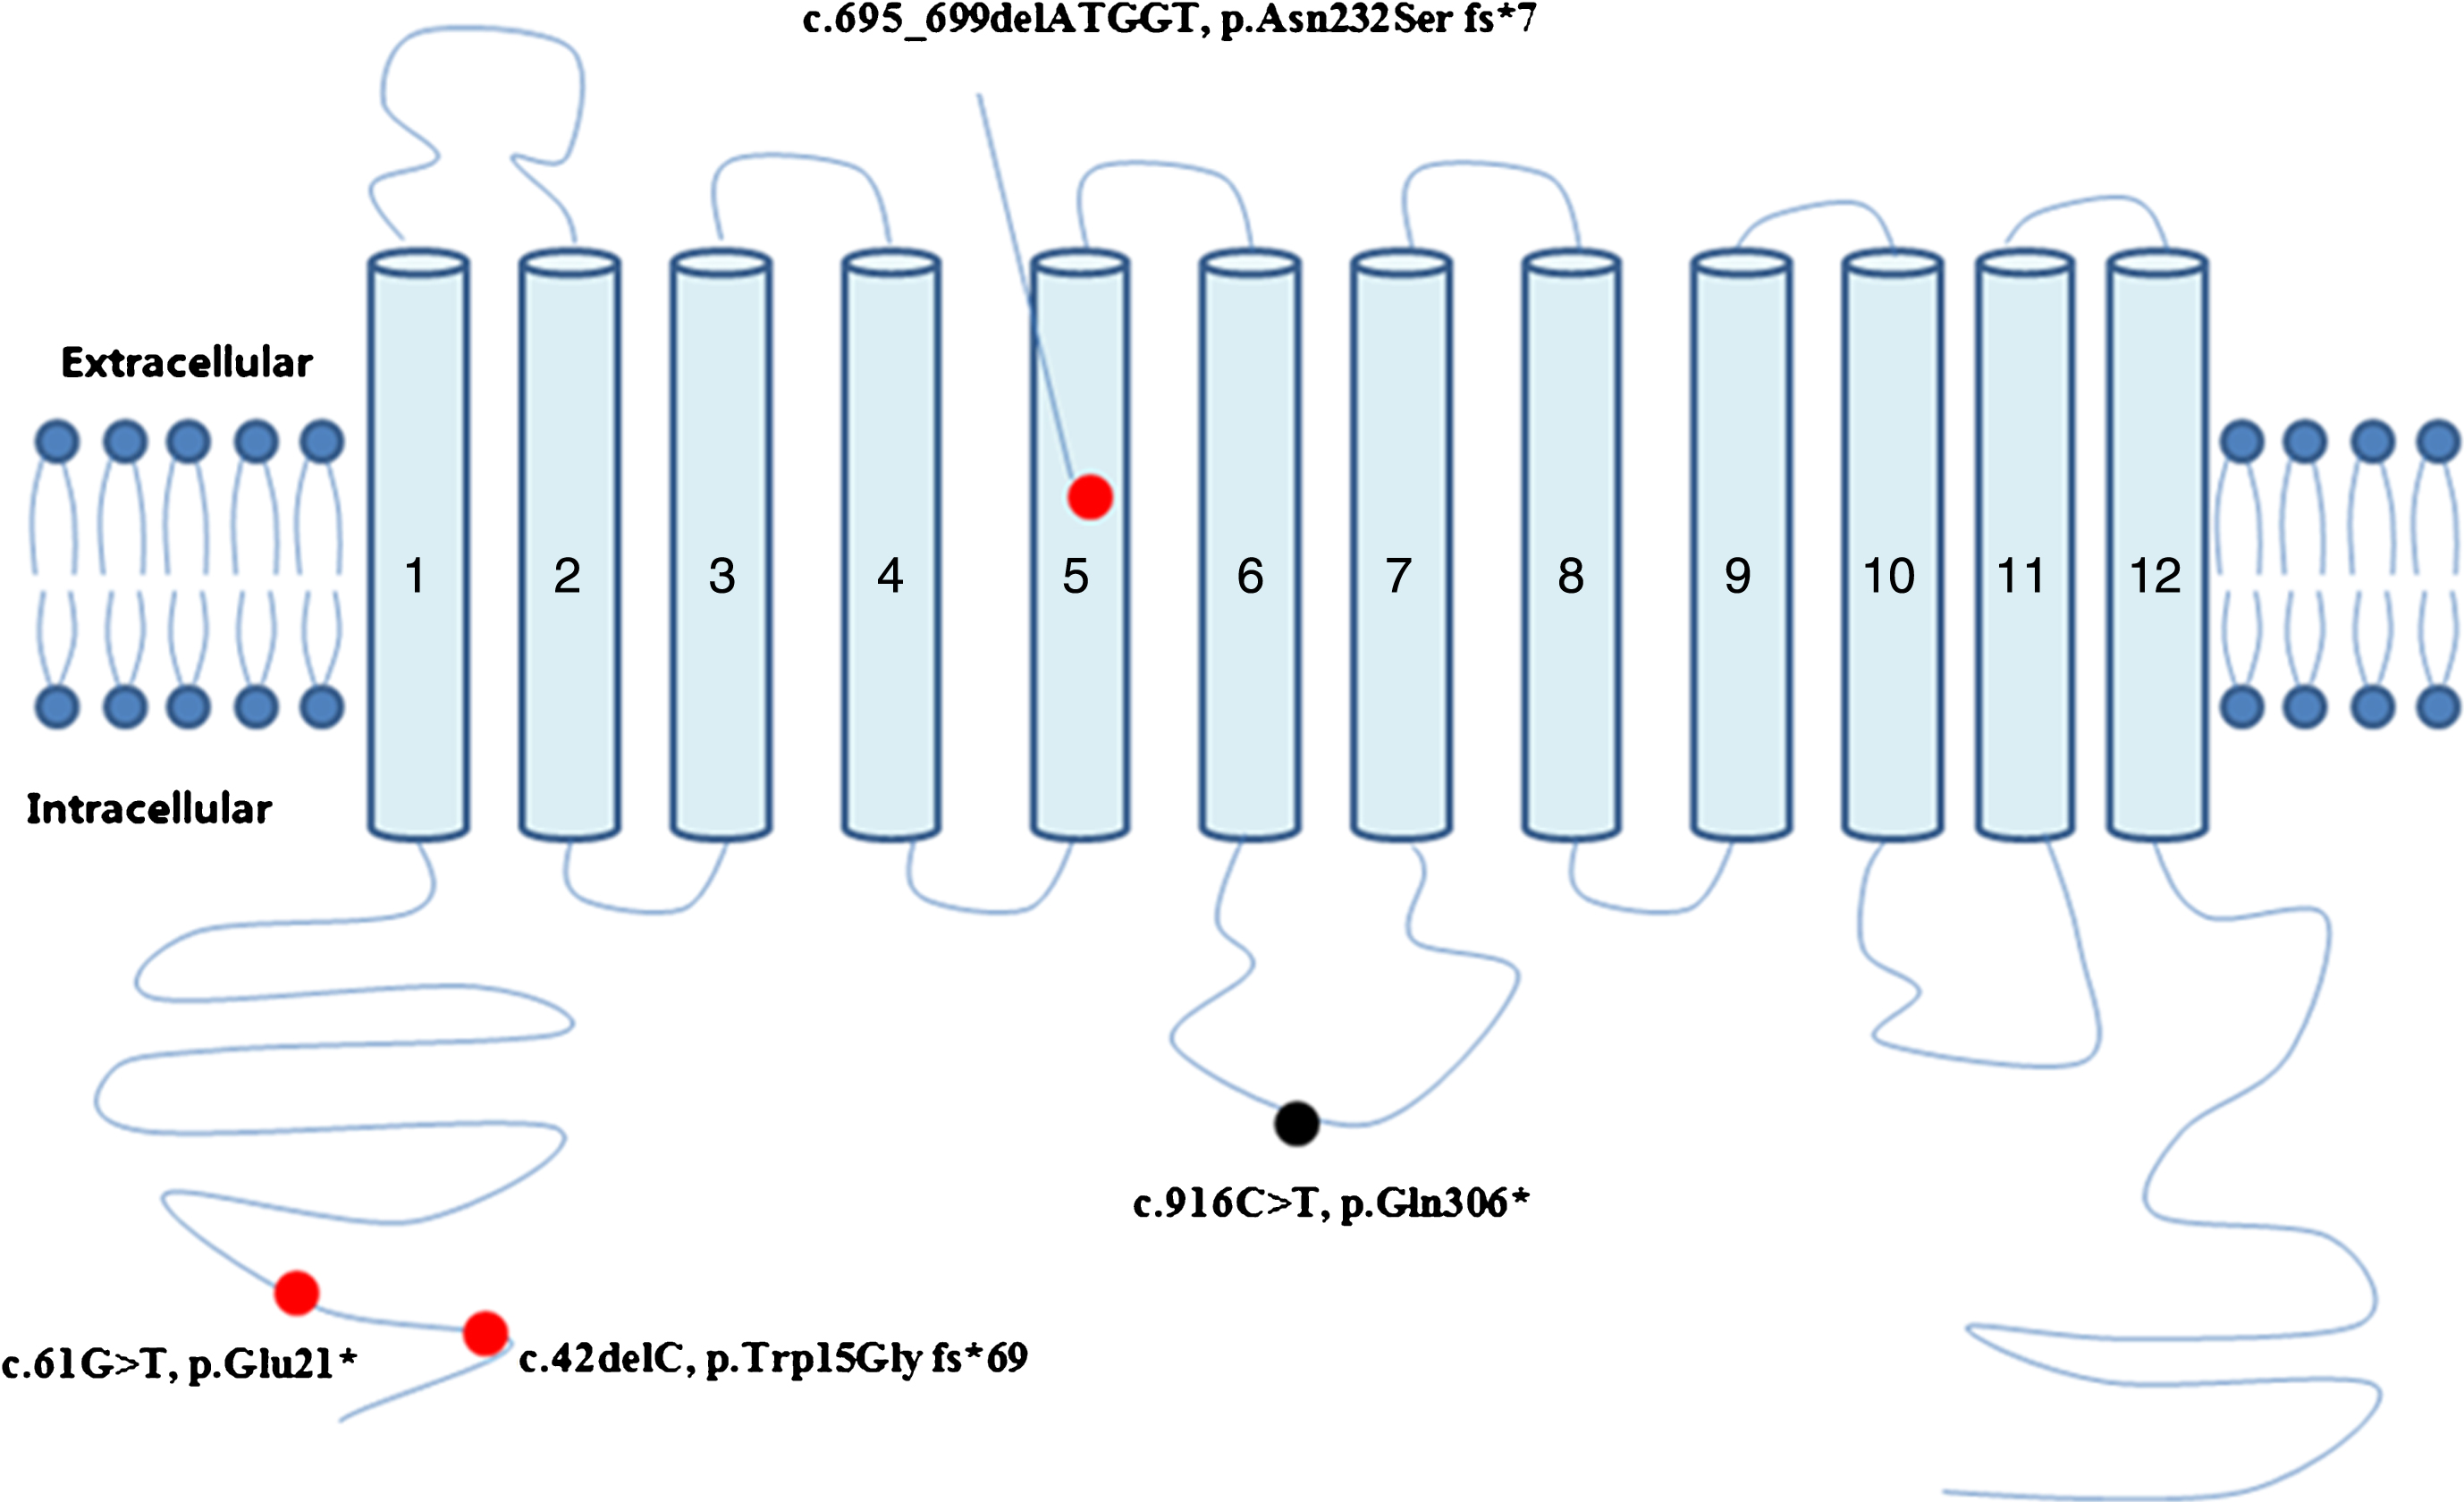 Schematic representation of the MCT8 protein and the locations of mutations found in this study. Red dot: novel mutations. Black dot: previously reported mutations.